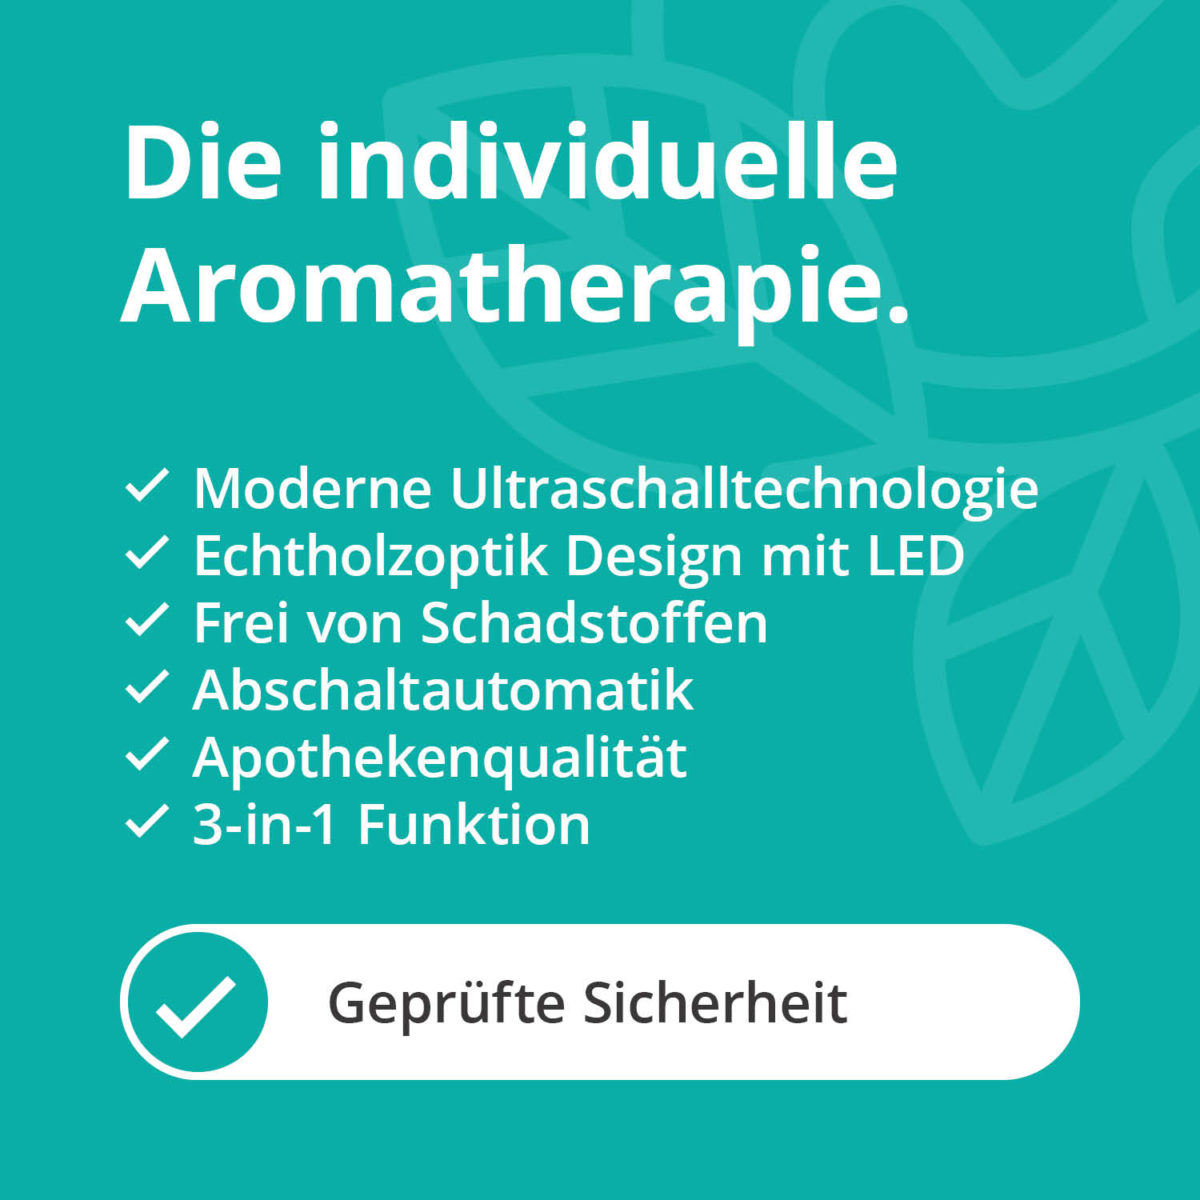 Aroma Diffuser in Holzoptik mit LED